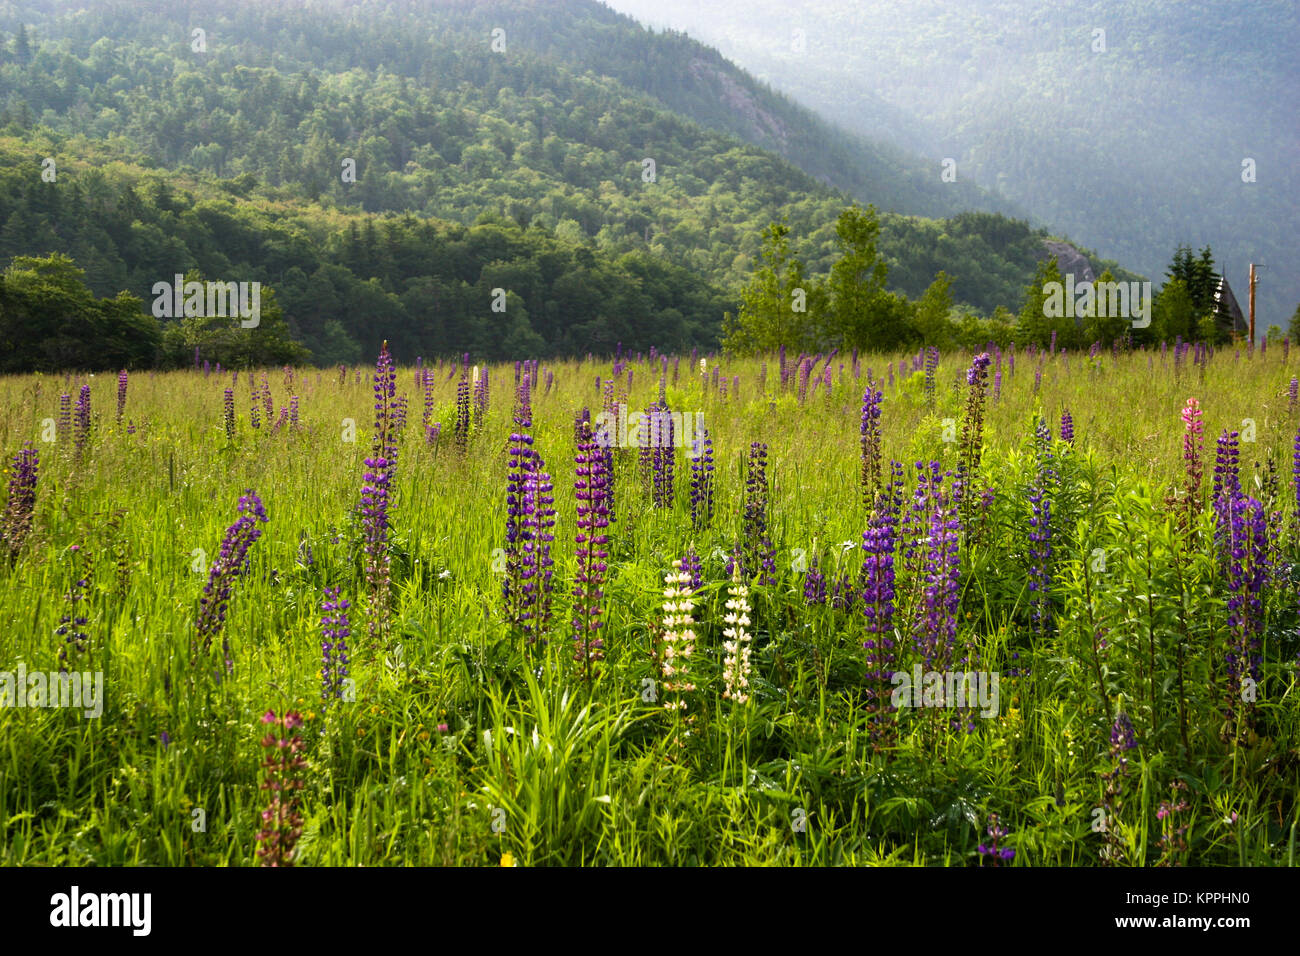 Lupine flowers in a meadow at the White Mountains National Forest, New Hampshire, USA. Stock Photo